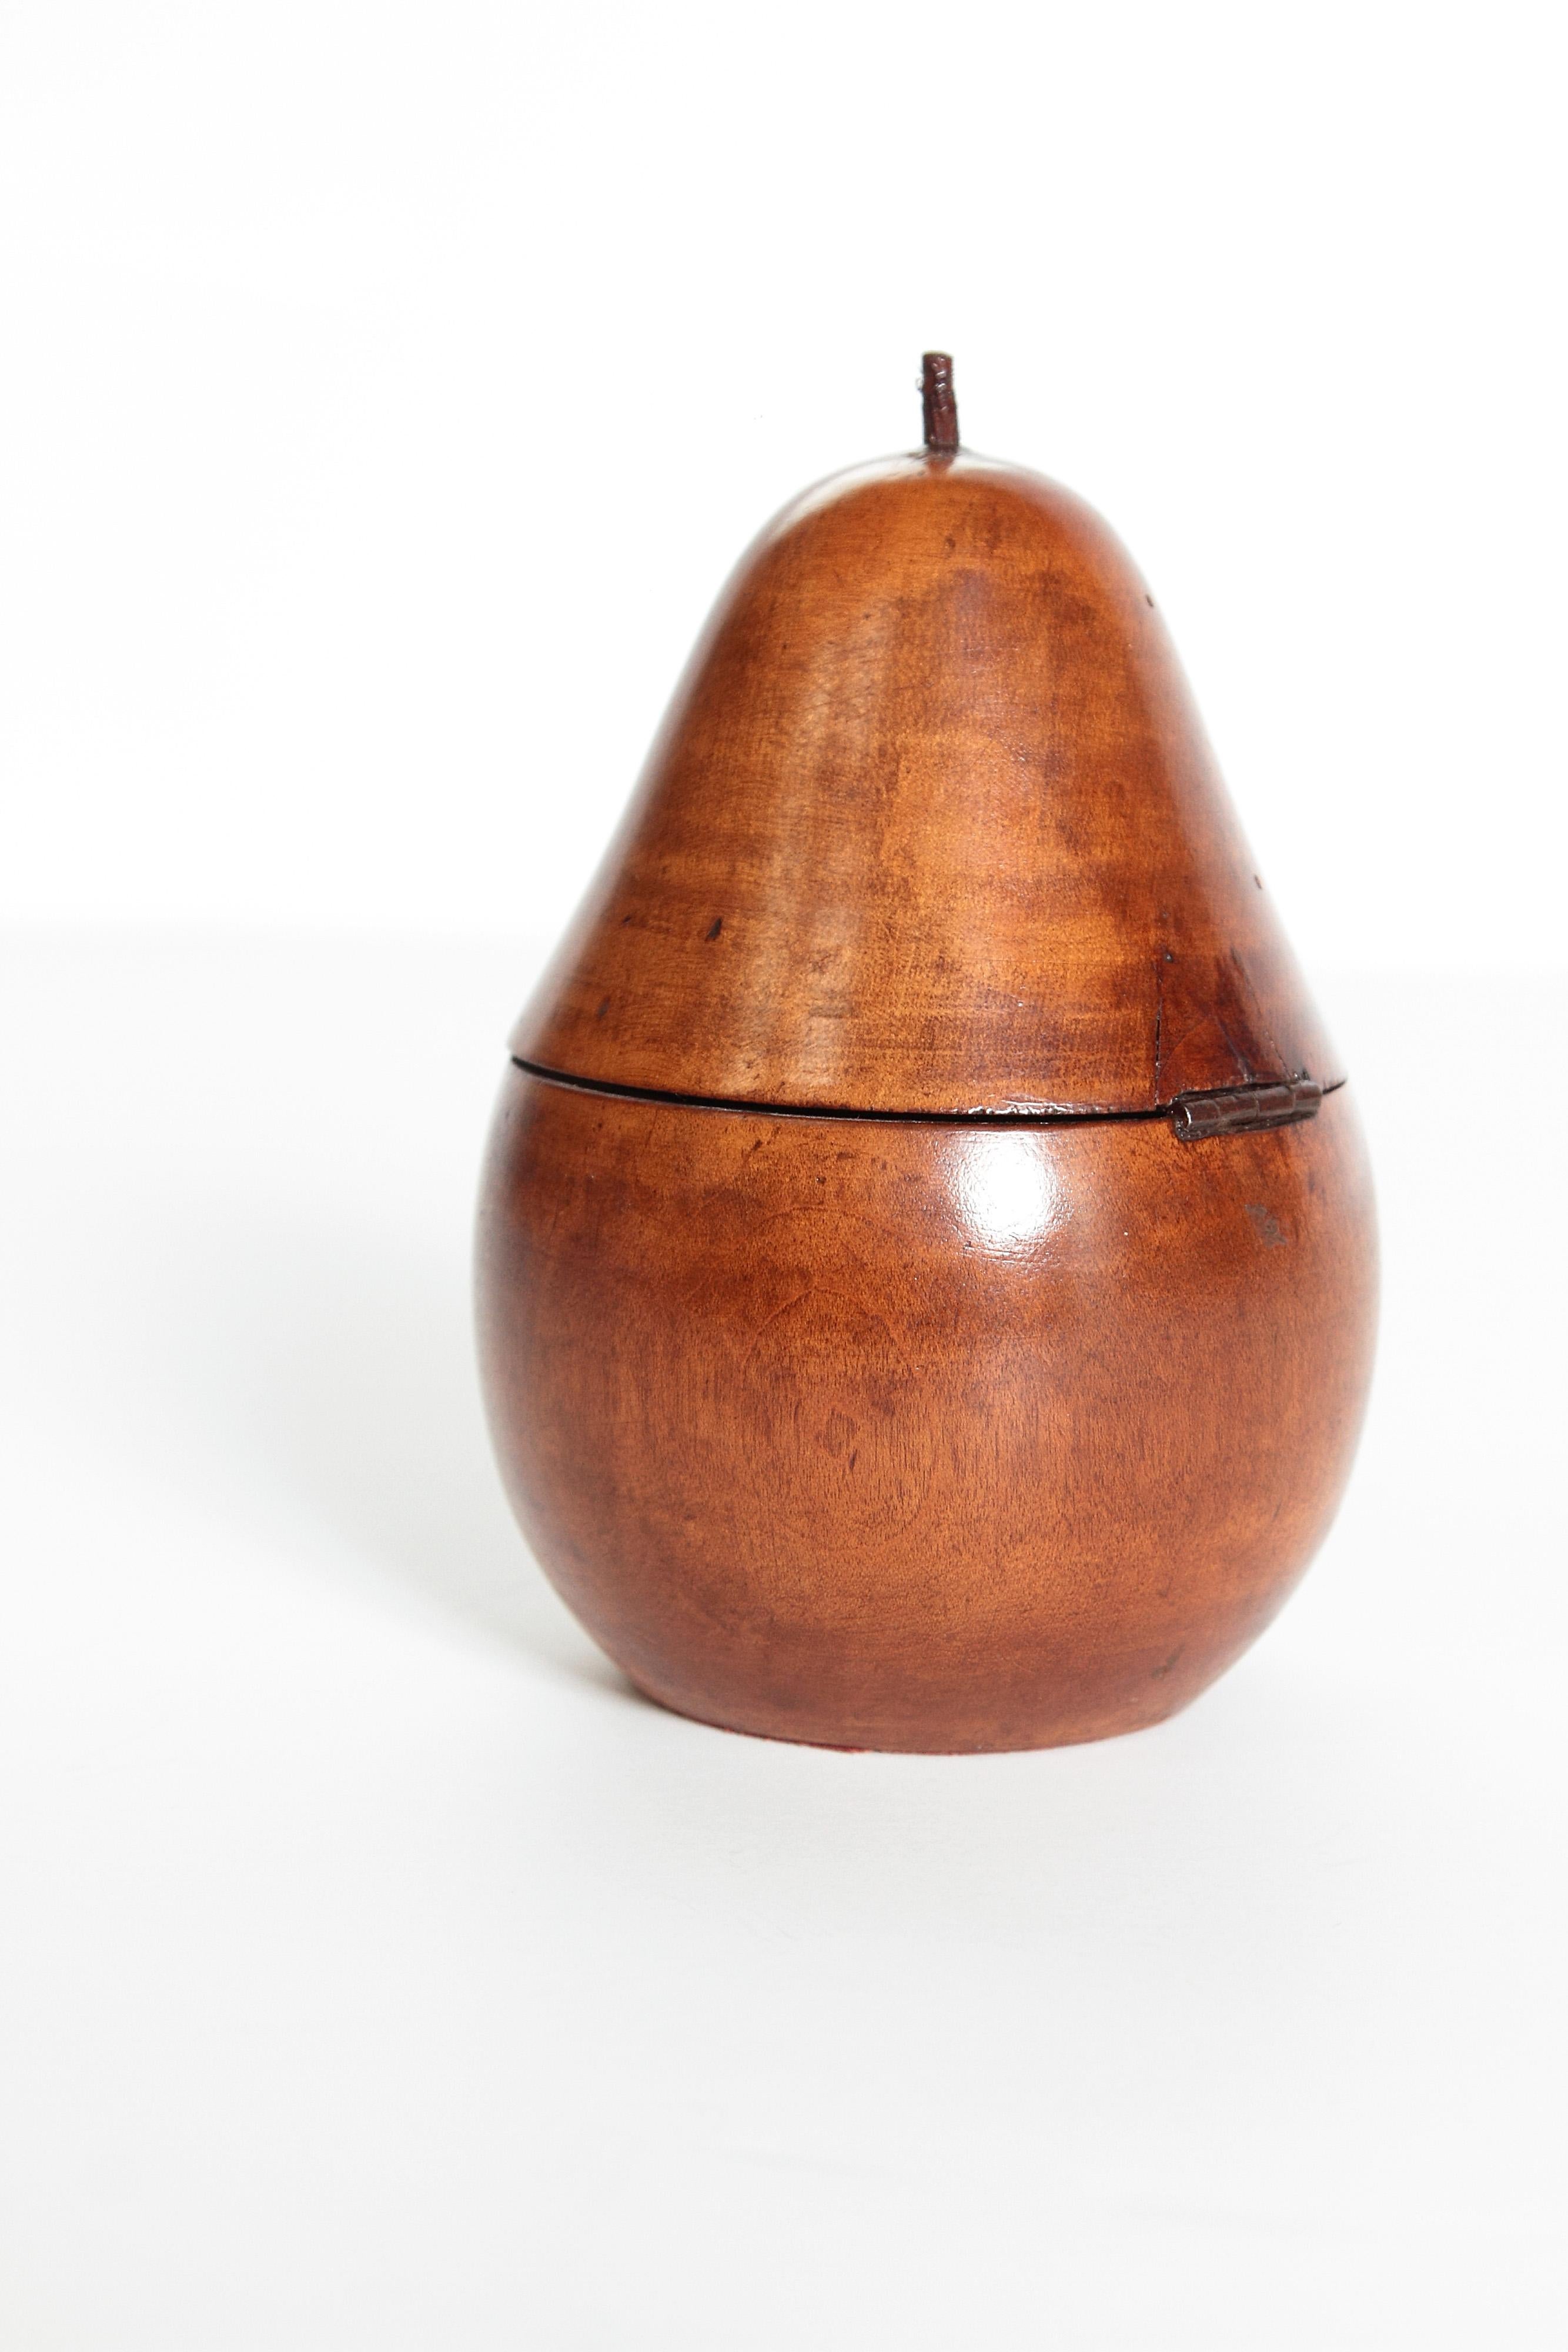 A beautifully shaped pear form tea caddy with a rich warm finish and patination. Intact stem of wood on hinged lid. The base has an oval brass escutcheon.